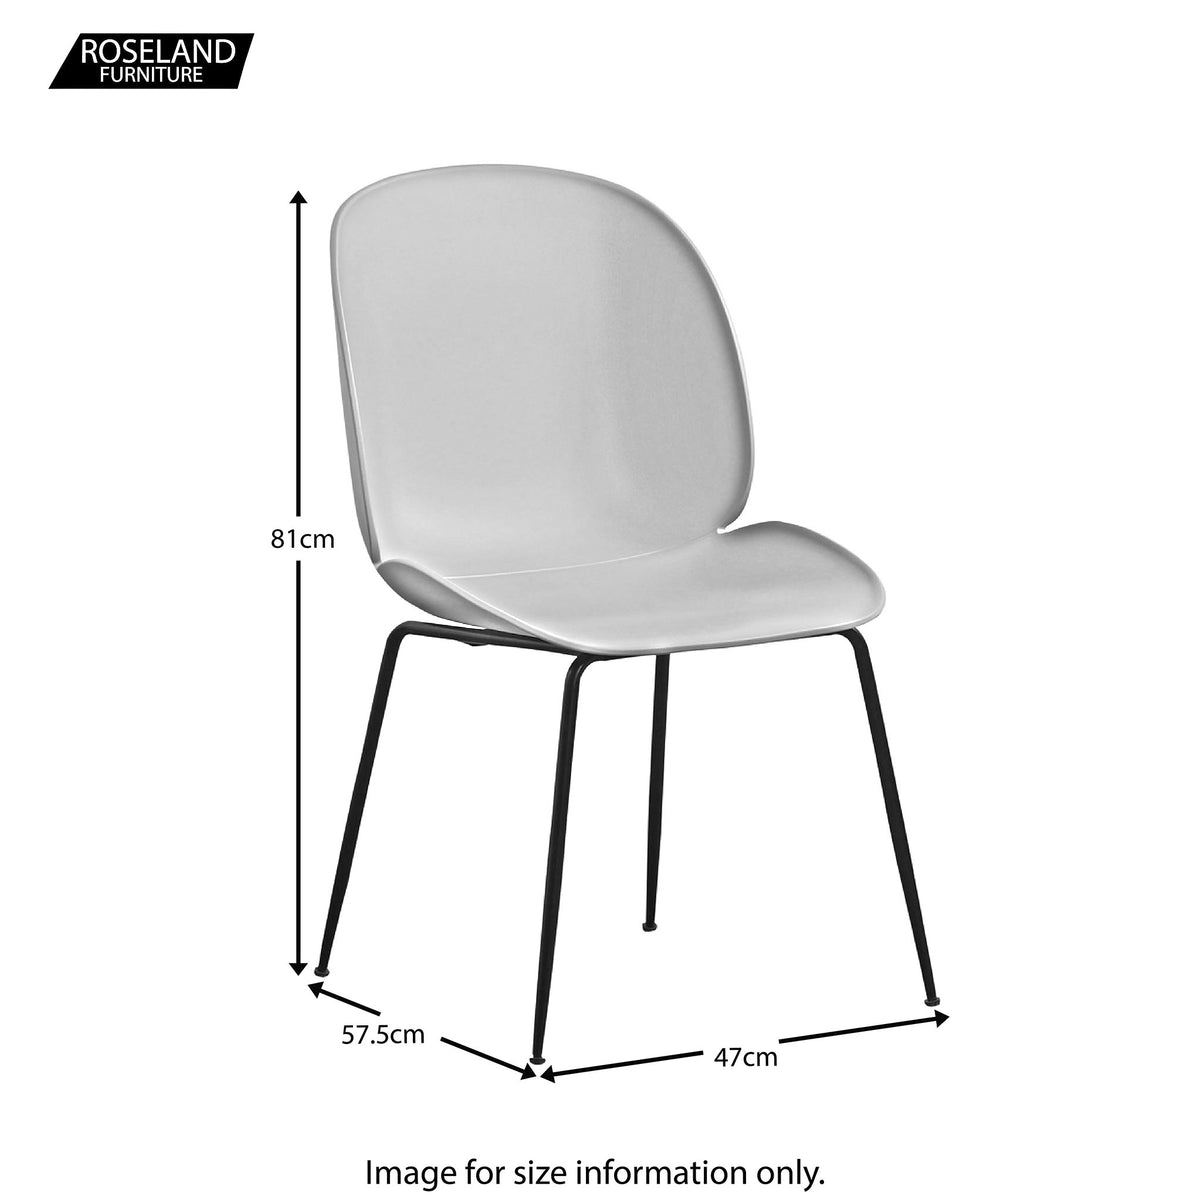 Katrina Contemporary Dining Chair - Size Guide